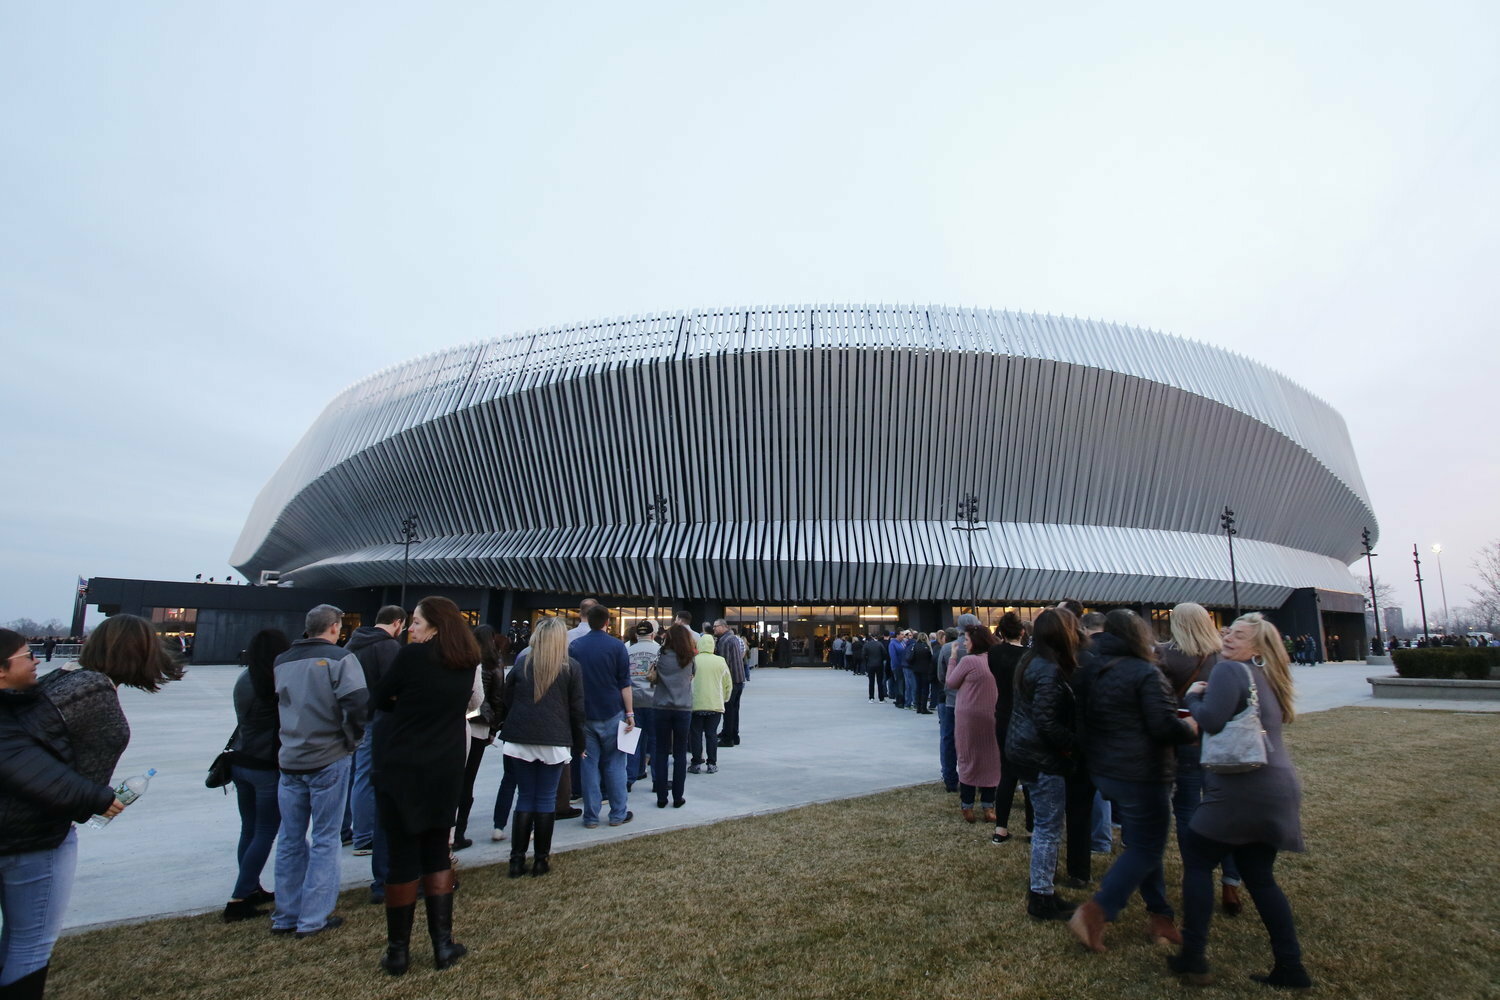 Efforts by the Las Vegas Sands to redevelop the Nassau Coliseum site and build stores, a hotel and a casino will take longer now that a judge has ordered the county to restart the public hearing process on the lease.